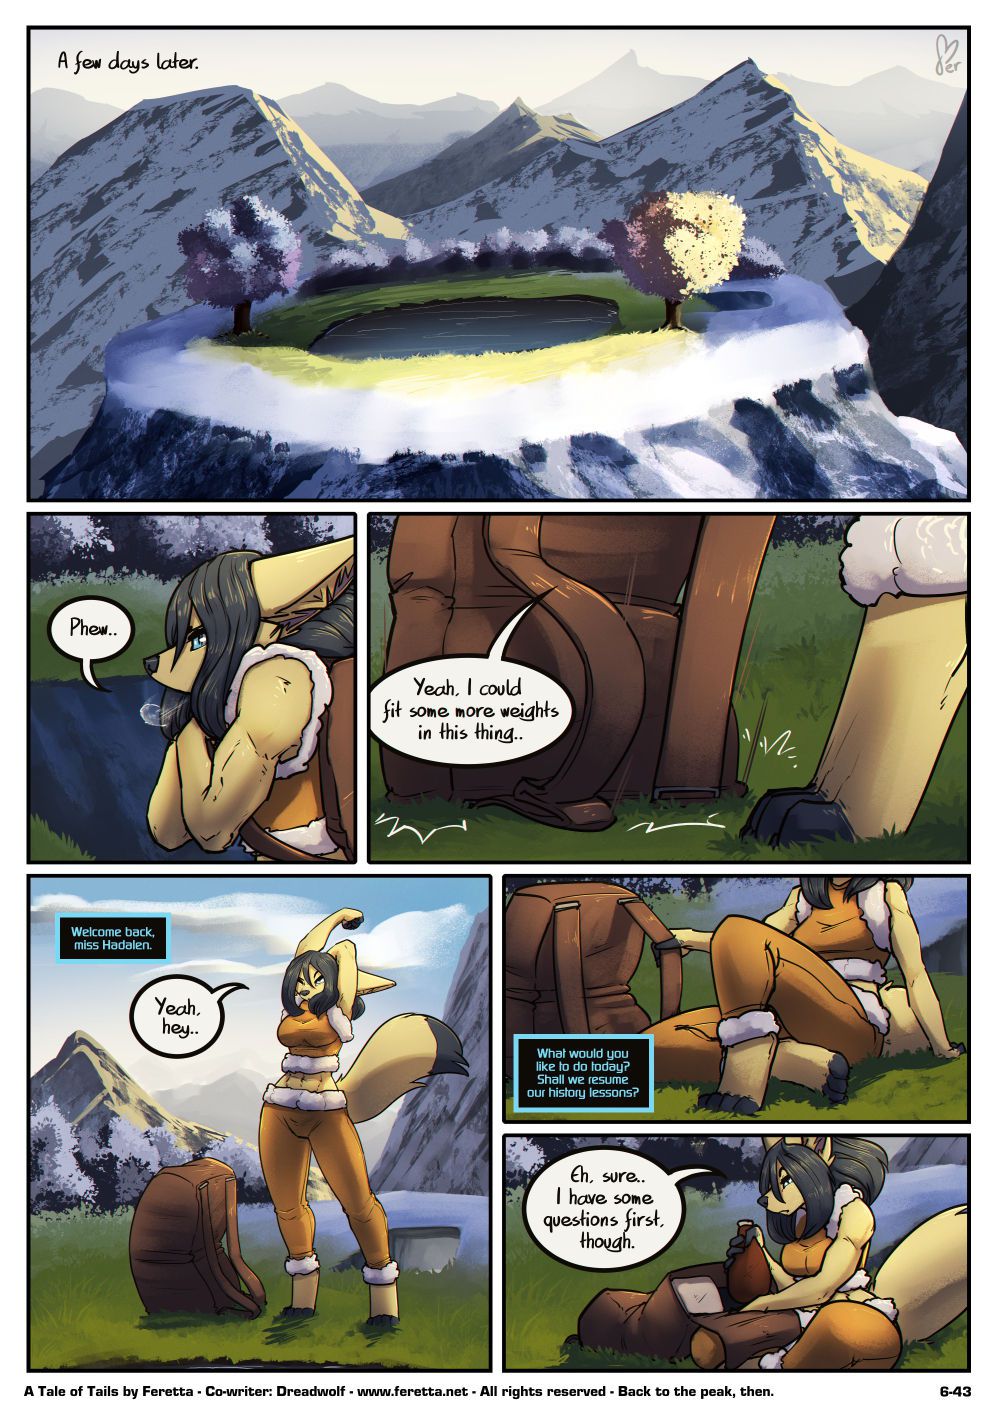 [Feretta] A Tale of Tails: Chapter 6 - Paths converge (ongoing) 45